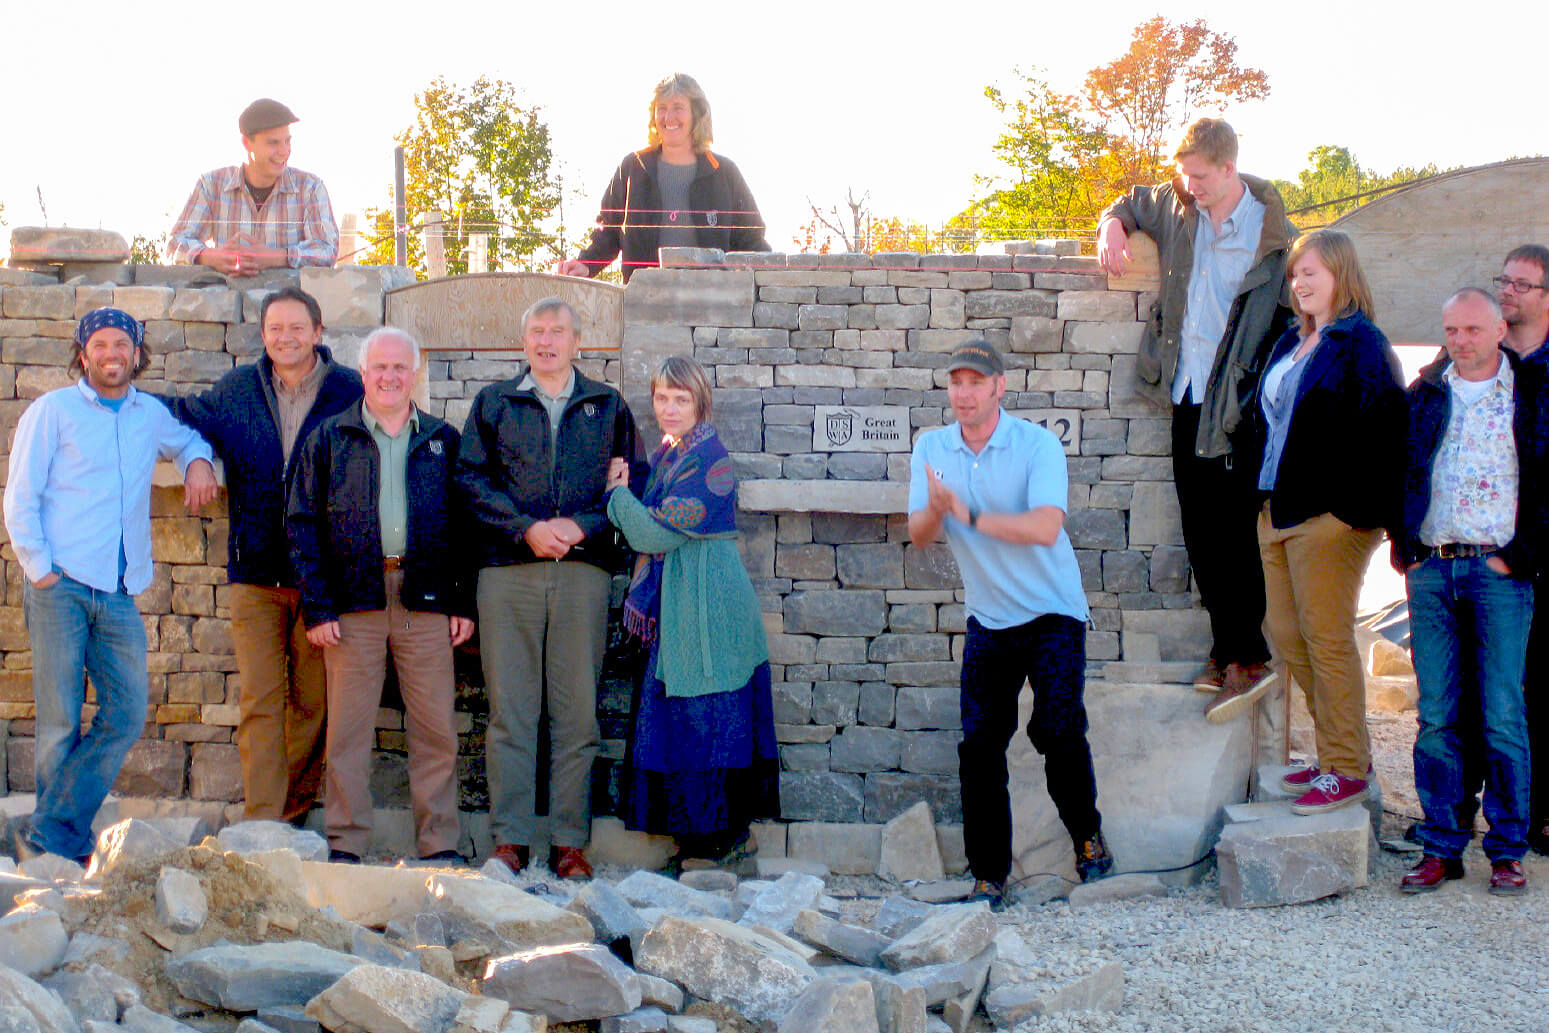 large group of people in front of a stone wall